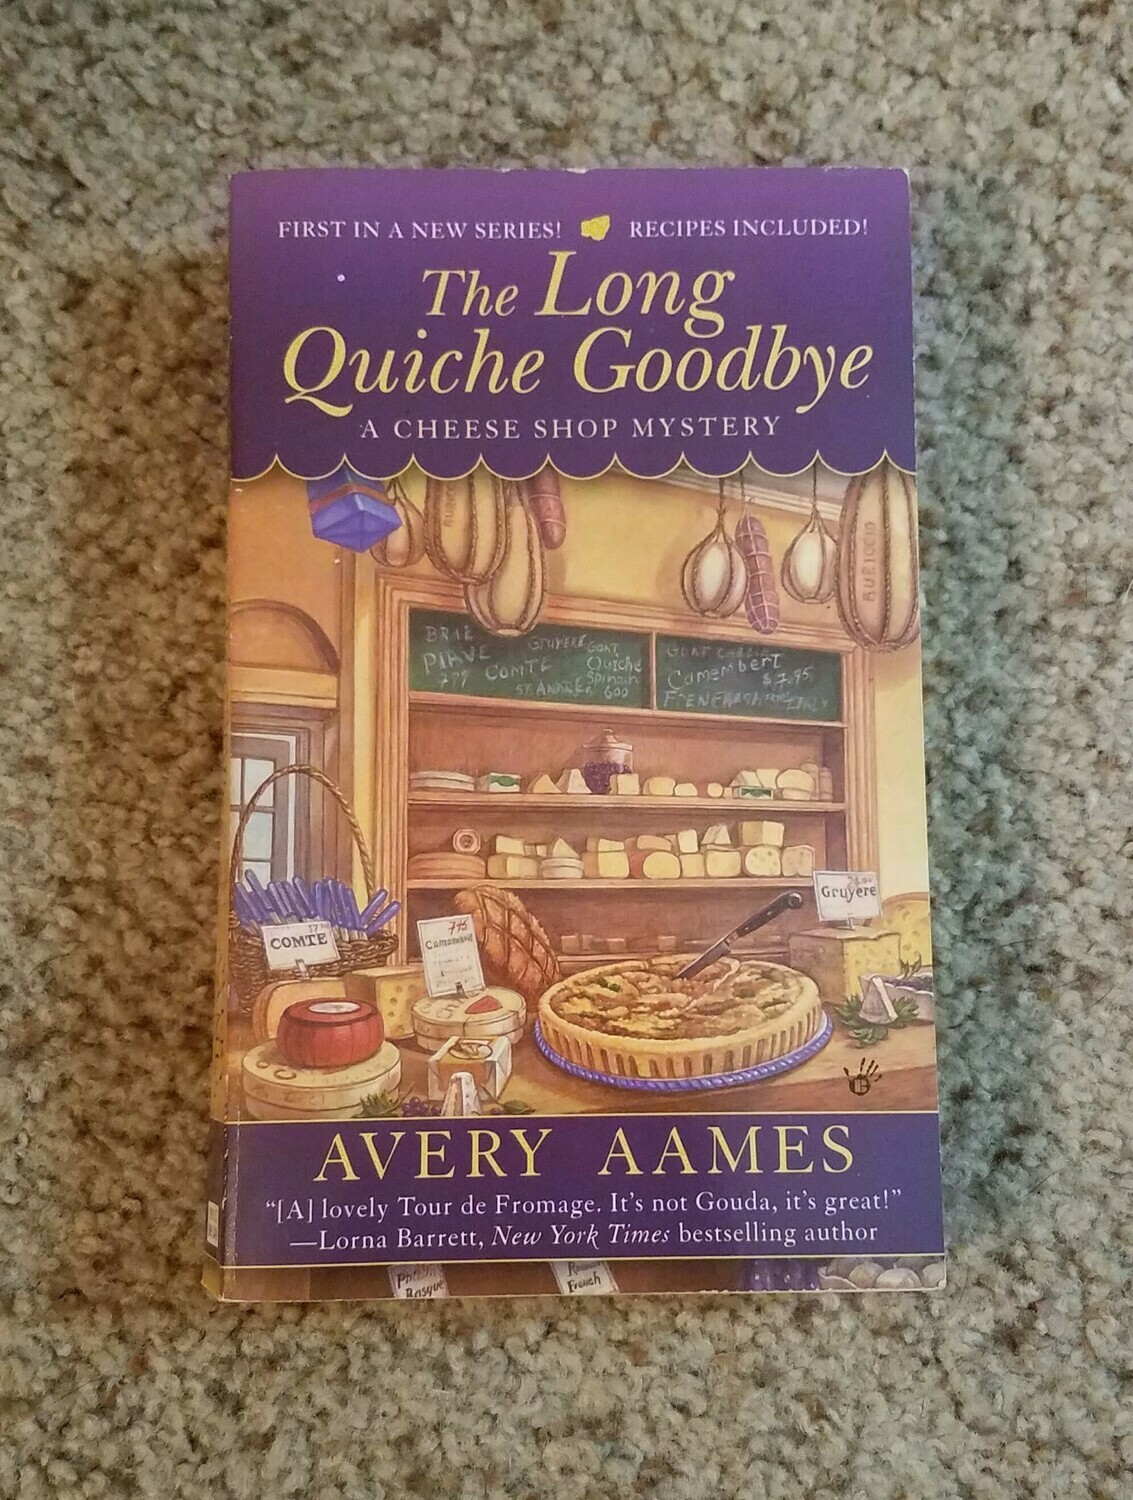 The Long Quiche Goodbye by Avery Aames